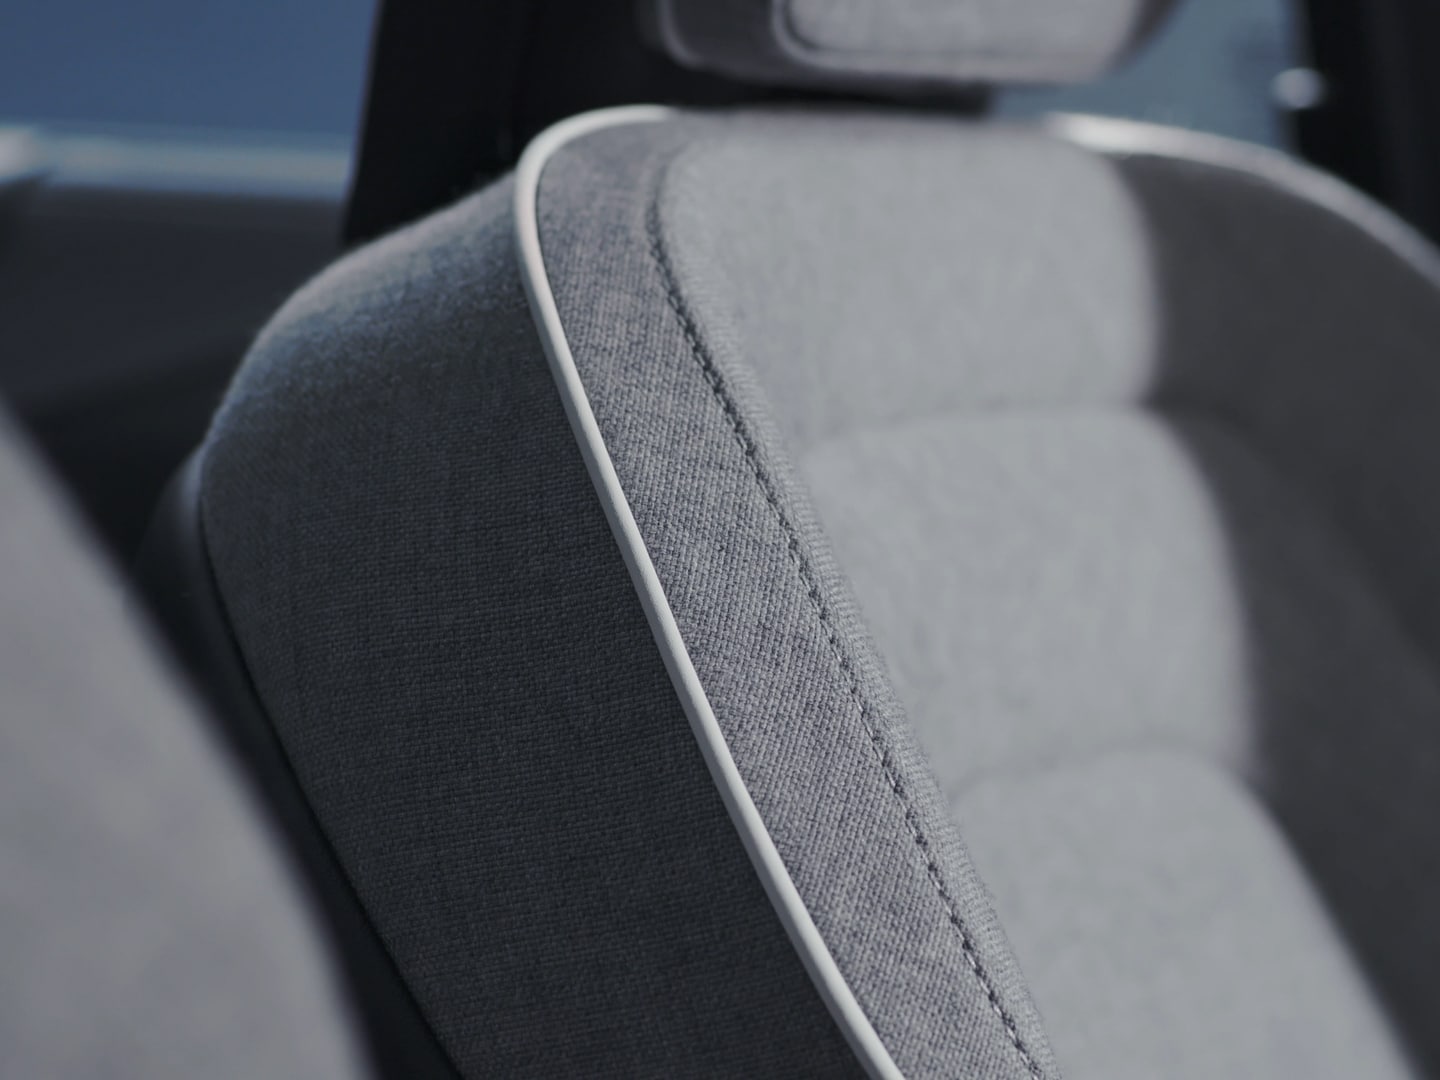 Interior close-up of the leather free Tailored Wool Blend seats in a Volvo XC90 plug-in hybrid.